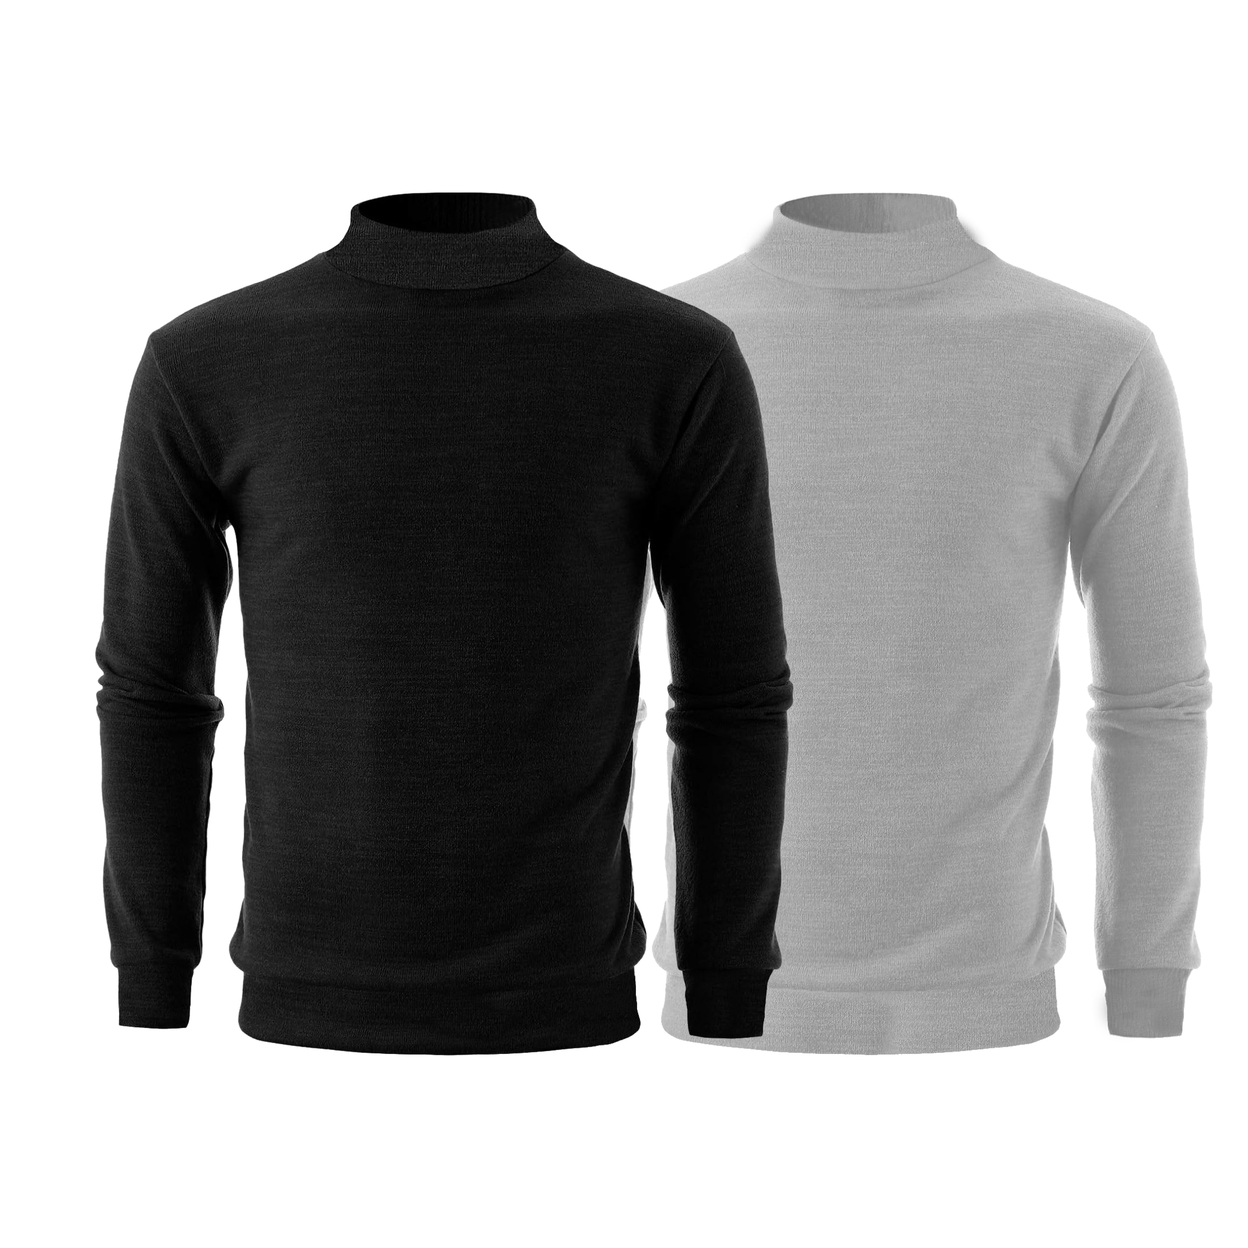 2-Pack: Men's Winter Warm Cozy Knit Slim Fit Mock Neck Sweater - Black & Charcoal, Small